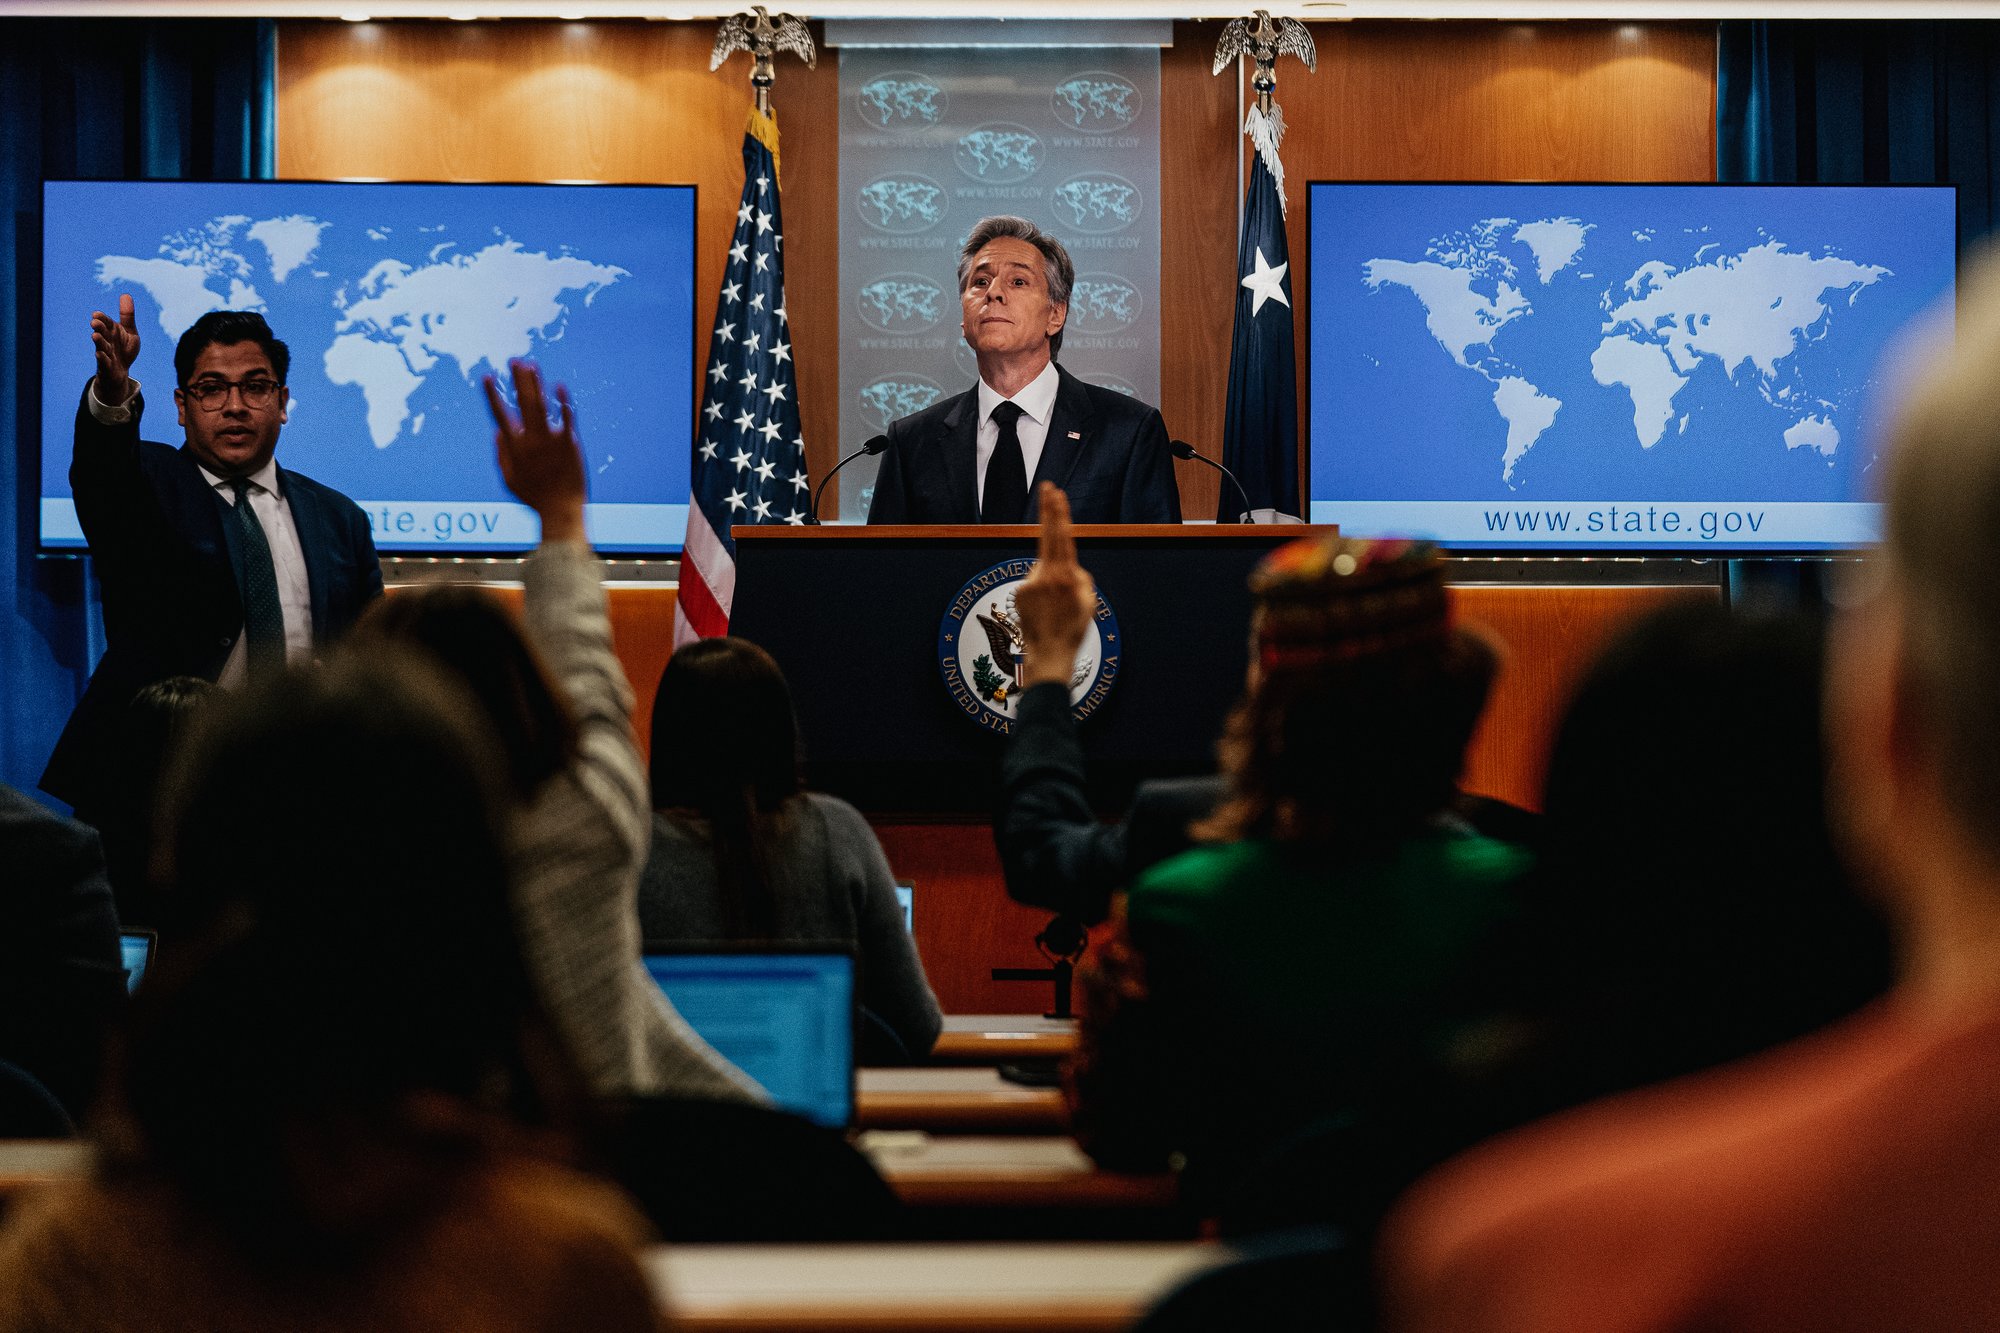 Secretary of State Antony Blinken takes a question from a reporter at a briefing on the 2022 Country Reports on Human Rights Practices at the State Department in Washington, Monday, March 20, 2023. (AP Photo/Andrew Harnik)